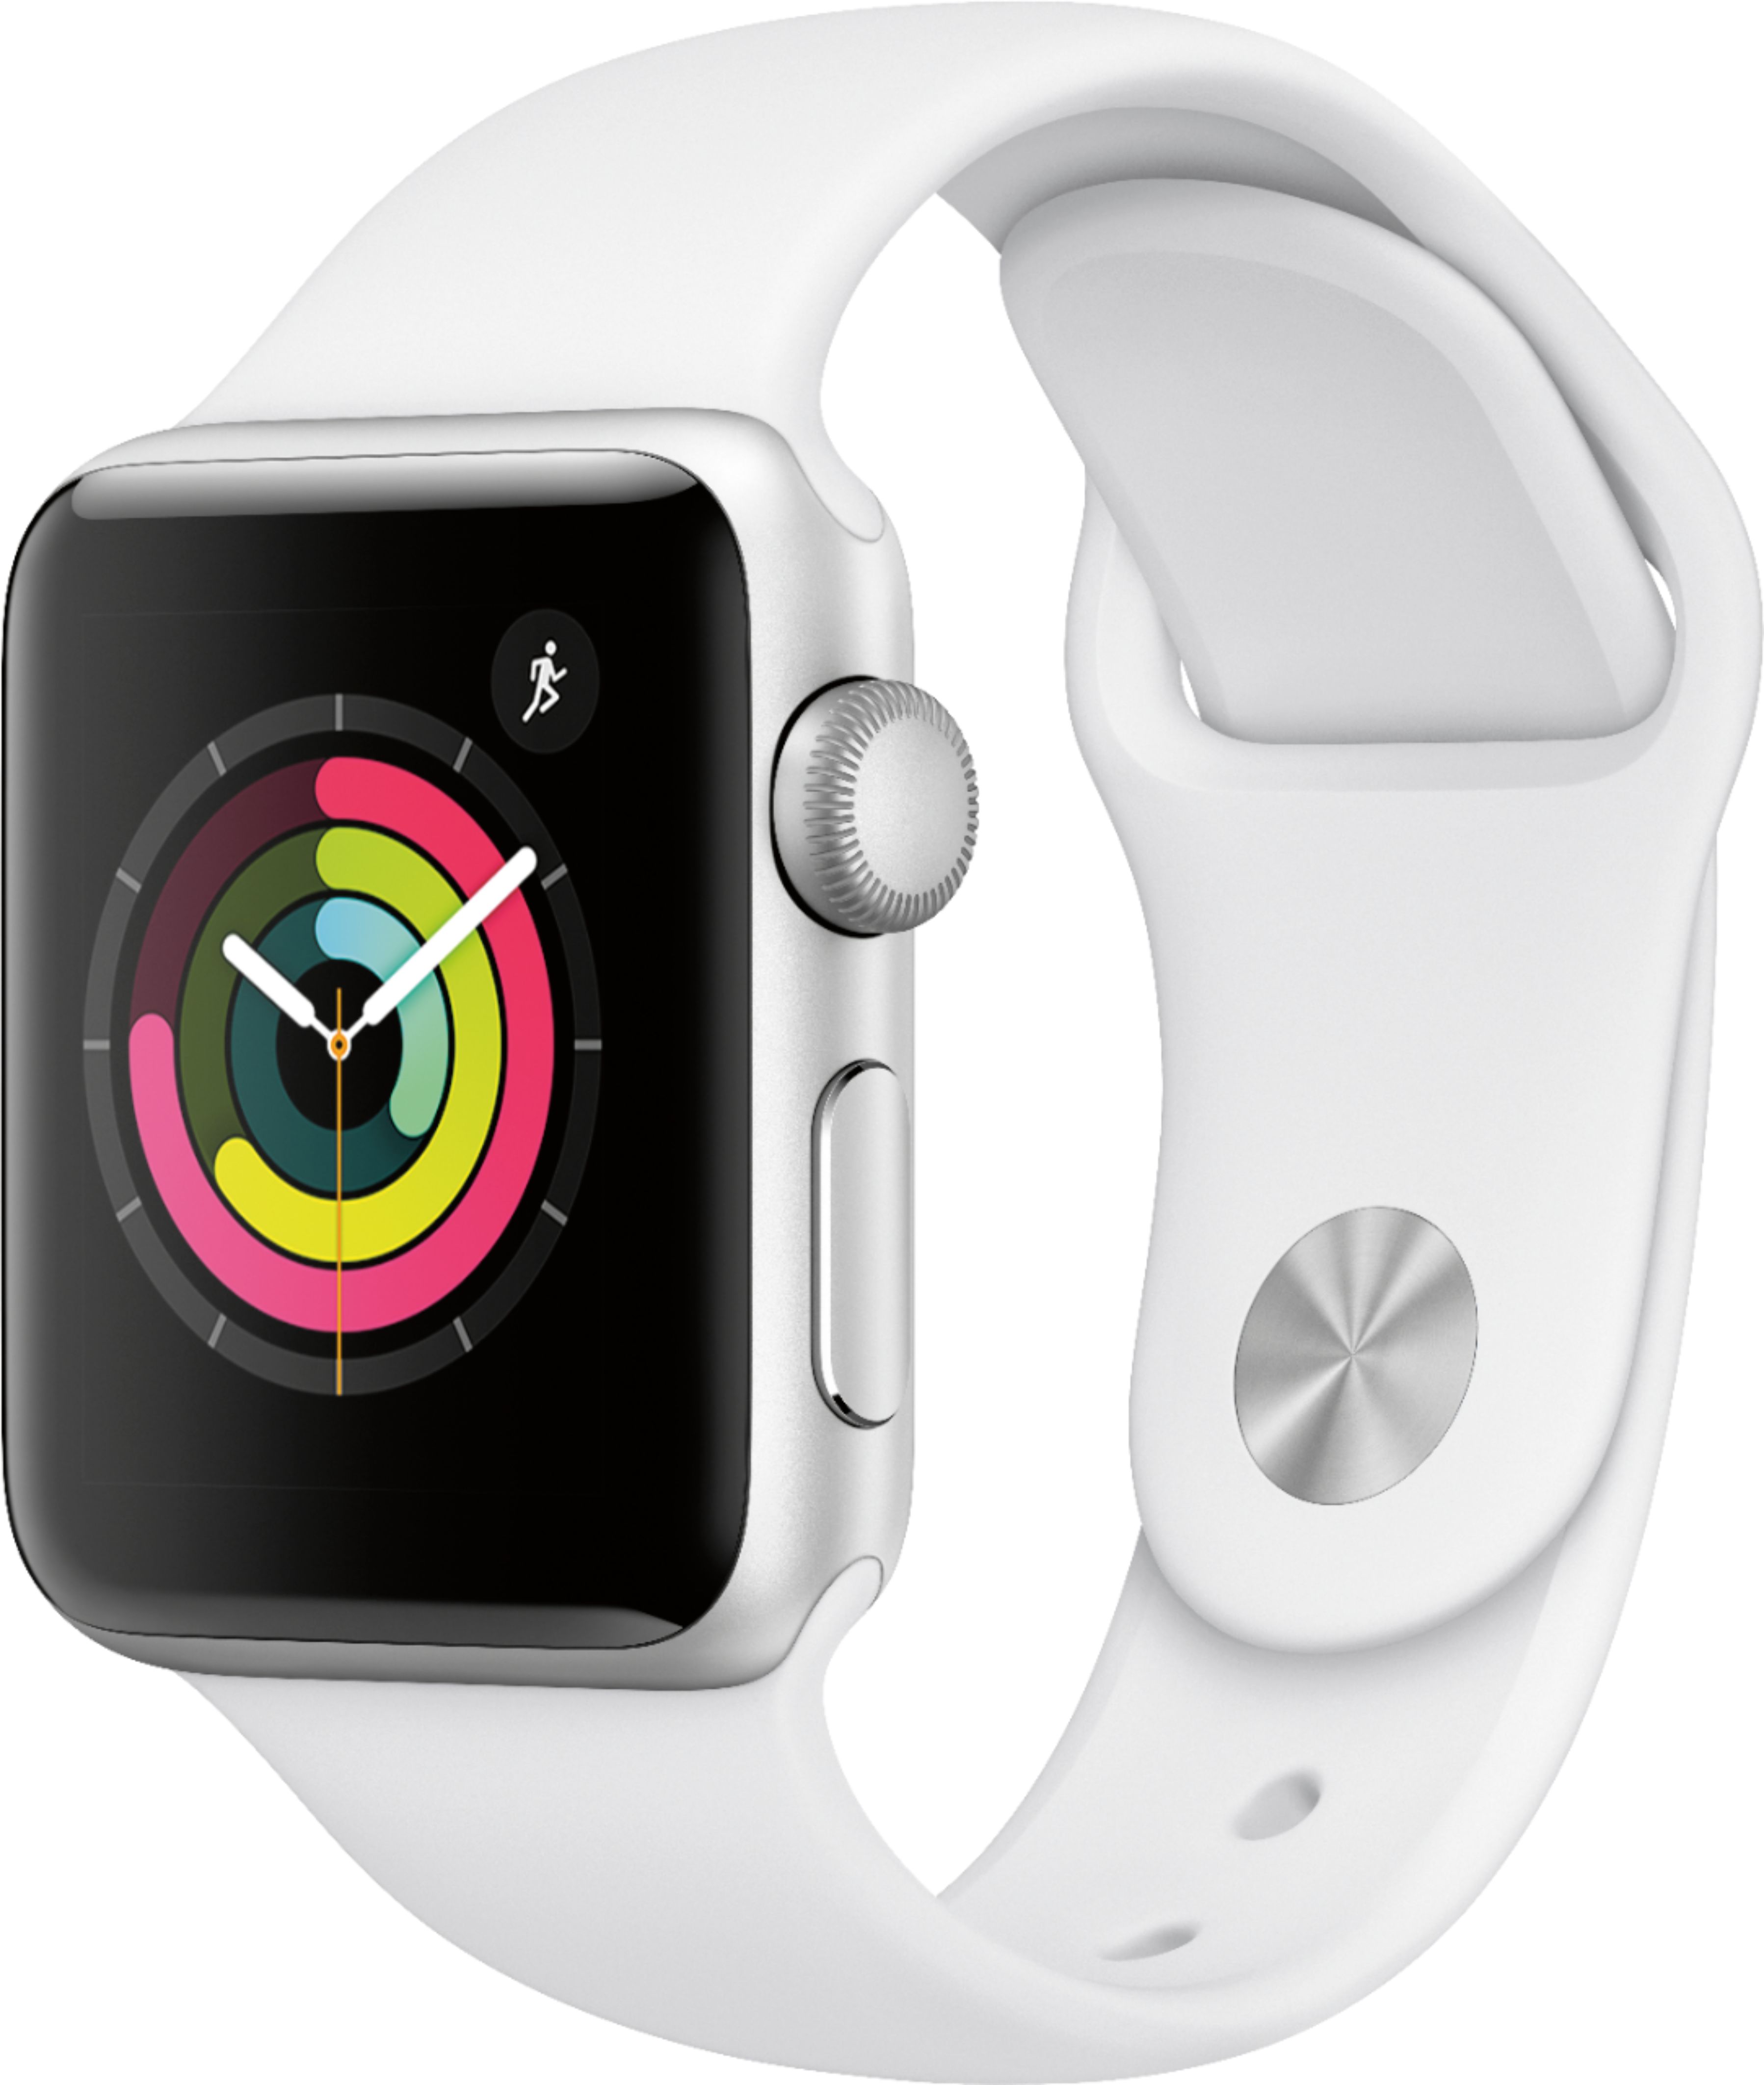 GSRF Apple Watch Series 3 (GPS) 38mm Silver Aluminum Case with White Sport Band - Silver Aluminum